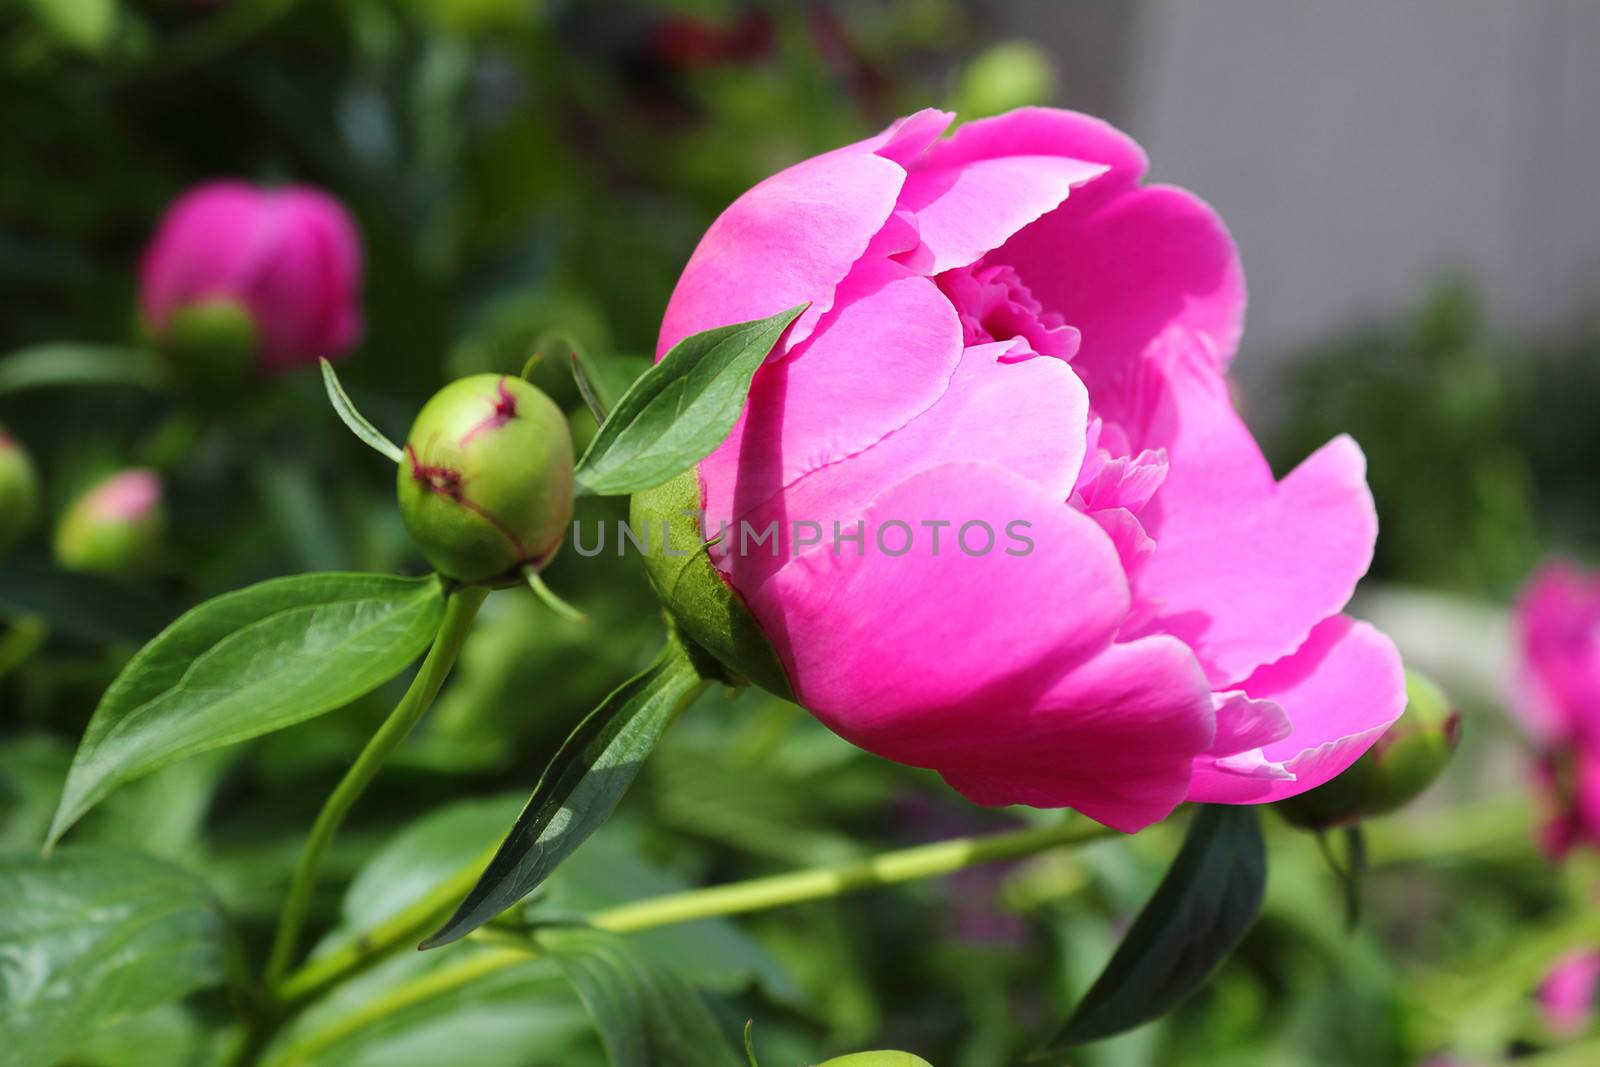 Hot pink peony, blooming in the flowerbed of the garden.
